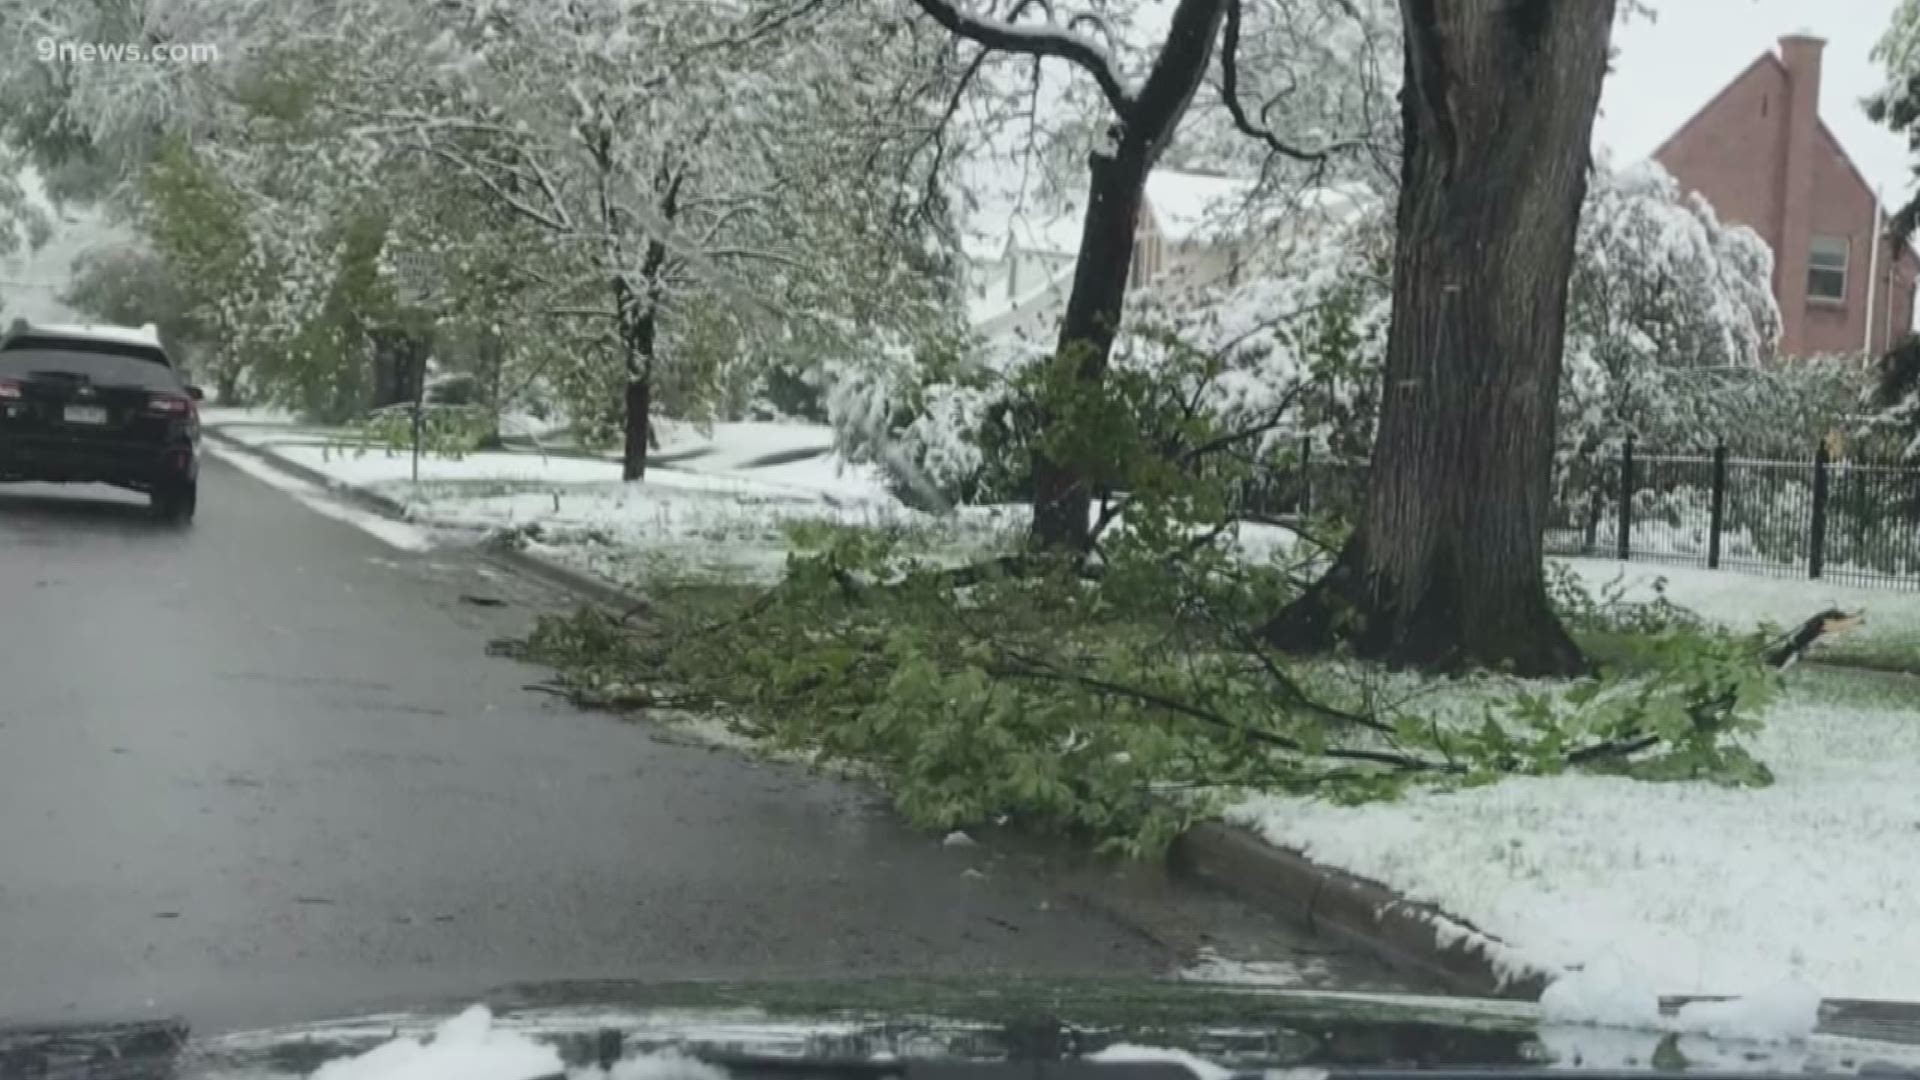 This week's spring snowstorm brought down trees and branches across the metro area.